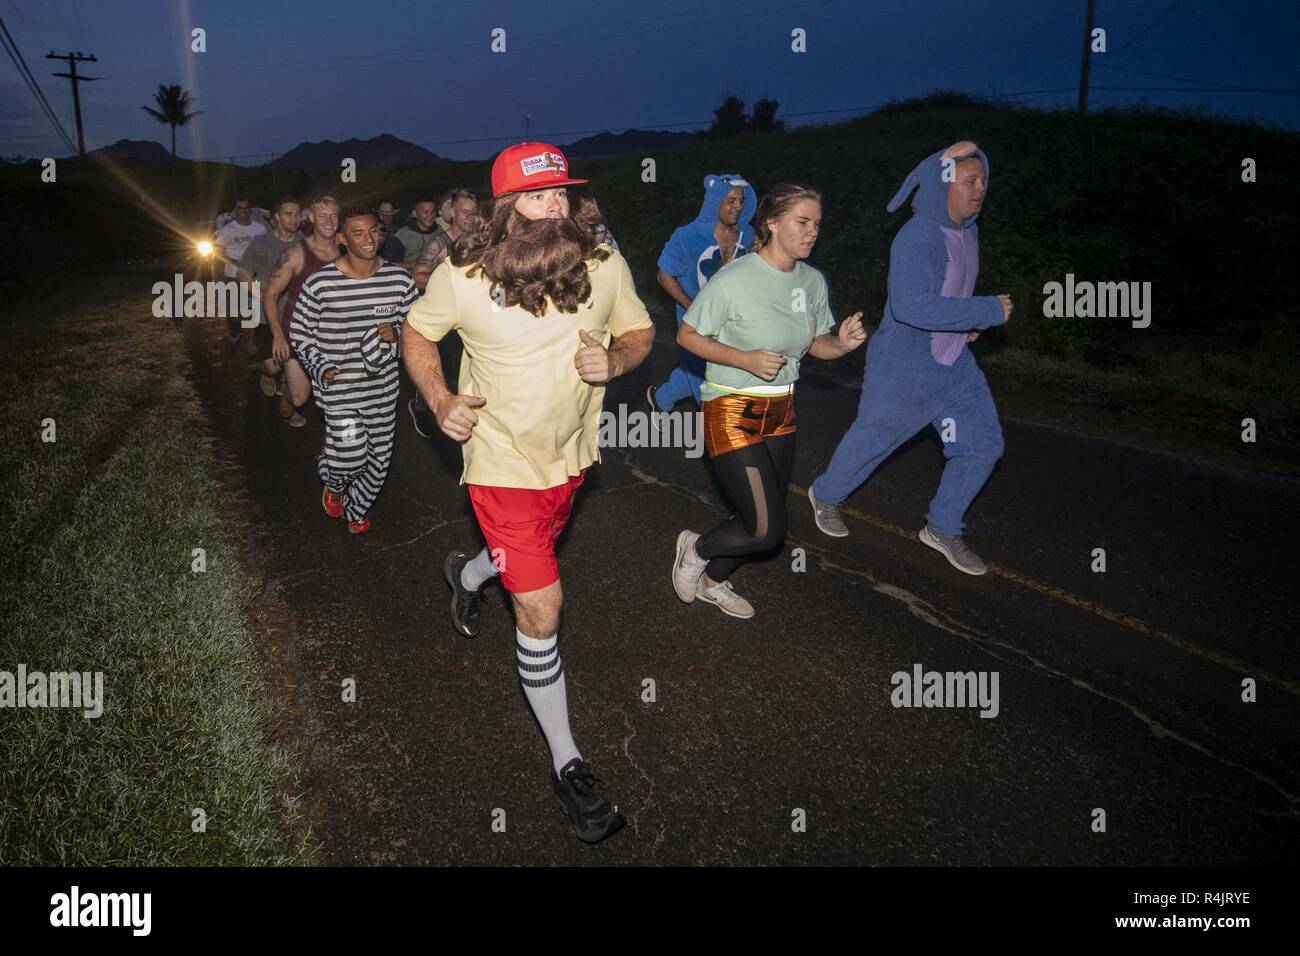 U.S. Marines and Sailors with Aviation Ordnance, Marine Aviation Logistics Squadron 24, Marine Aircraft Group 24, conducted a motivated run on Marine Corps Air Station Kaneohe Bay, Marine Corps Base Hawaii, Oct. 31, 2018. U.S. Service members with Aviation Ordnance dressed up for a unit run to celebrate Halloween. Stock Photo